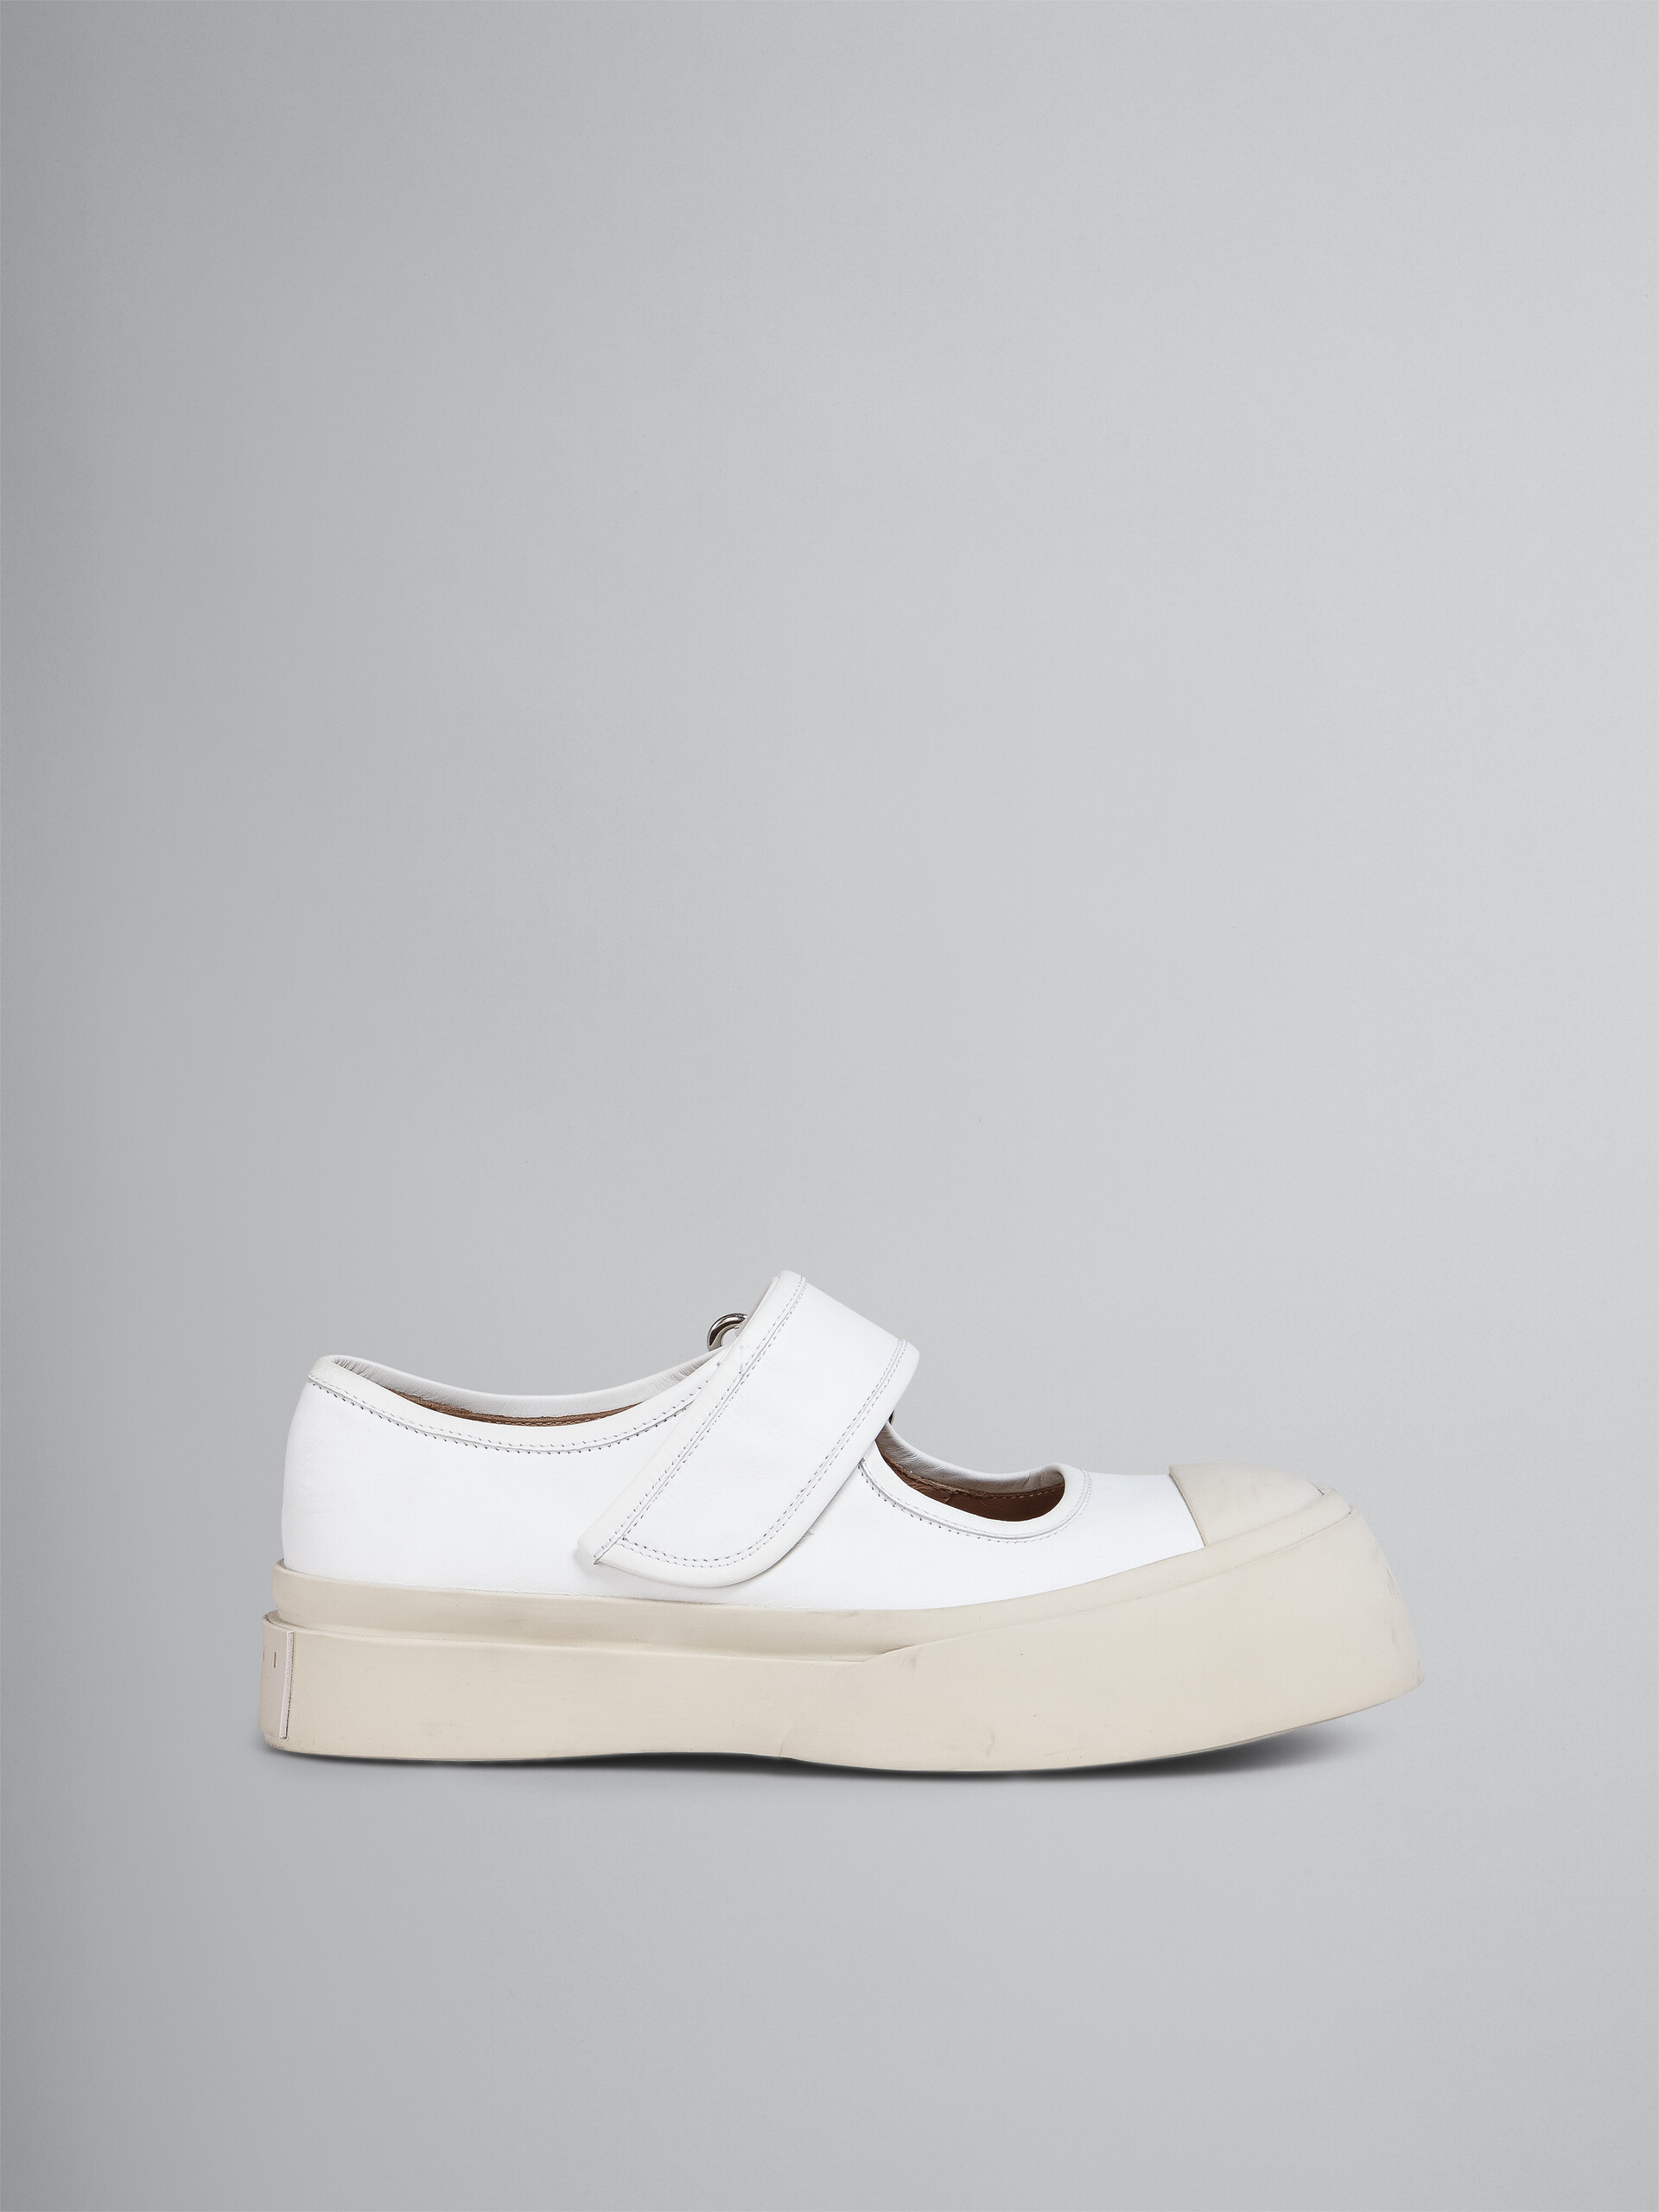 White nappa leather Mary Jane sneaker - Sneakers - Image 1